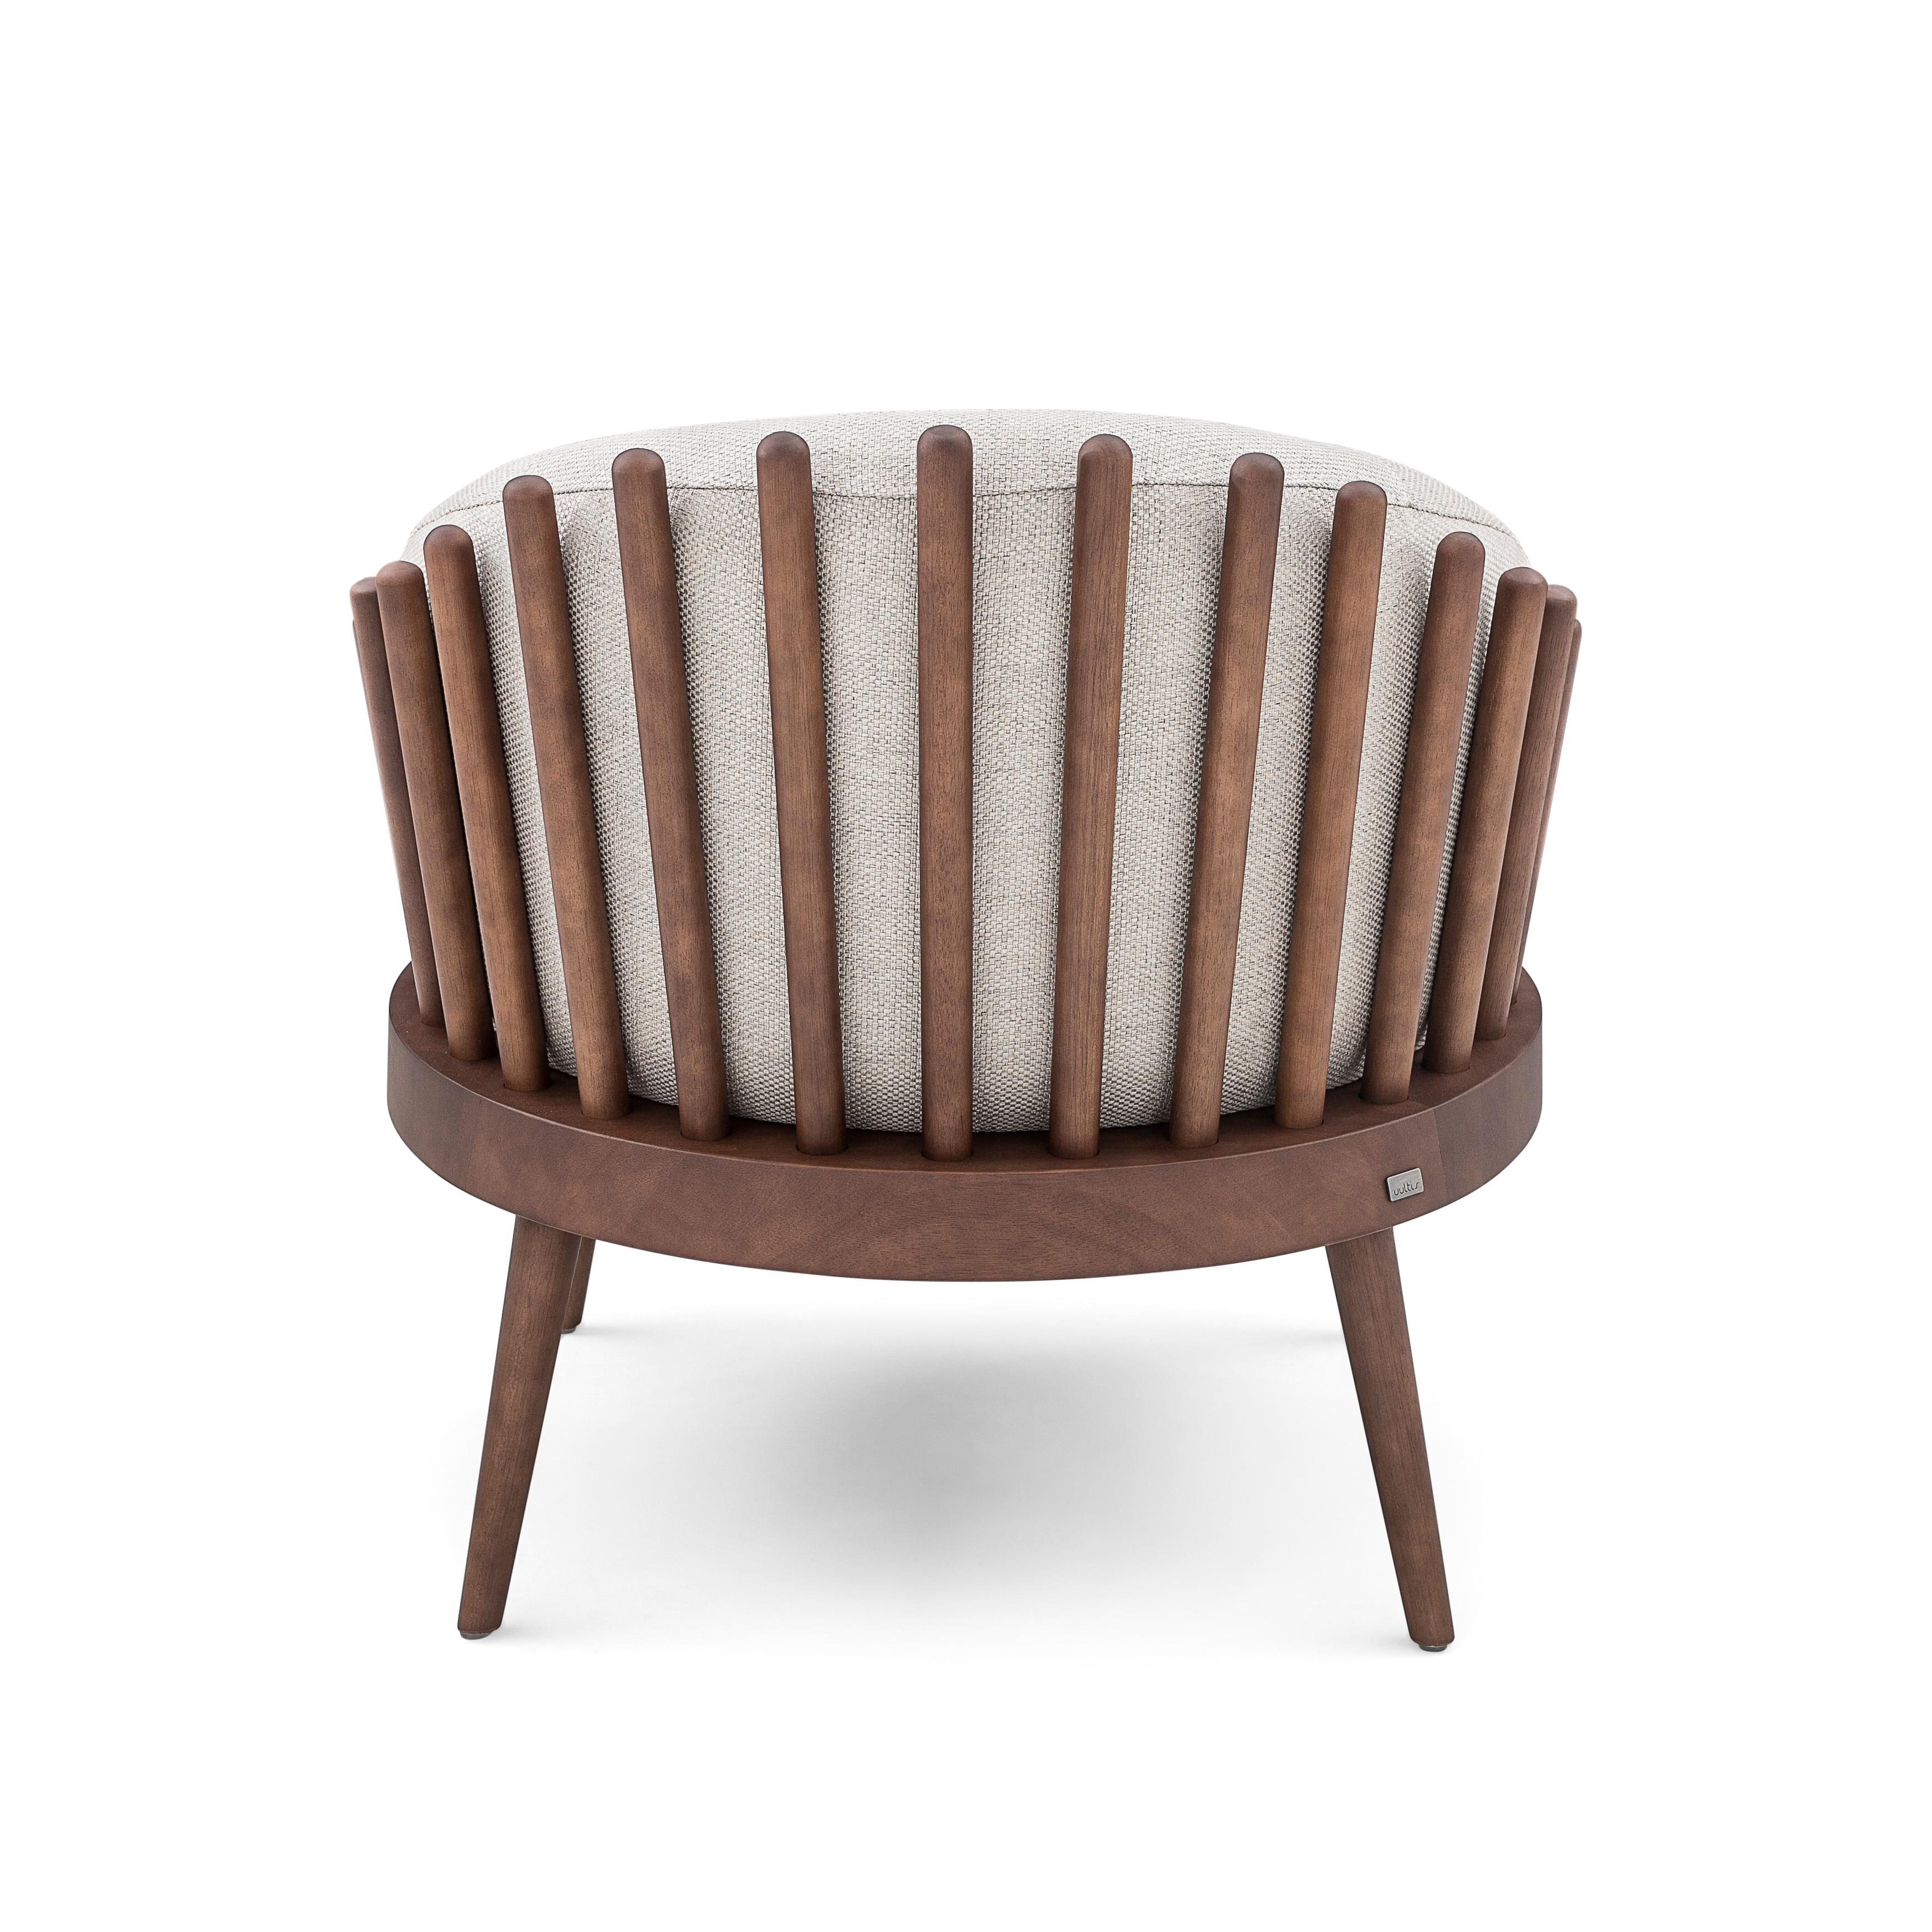 The Uultis design team has created this beautiful Fane armchair, upholstered with a beautiful and soft off-white fabric, feature with a walnut wood finish. This beautiful creation will provide a perfect comfortable space with its cushion seat and